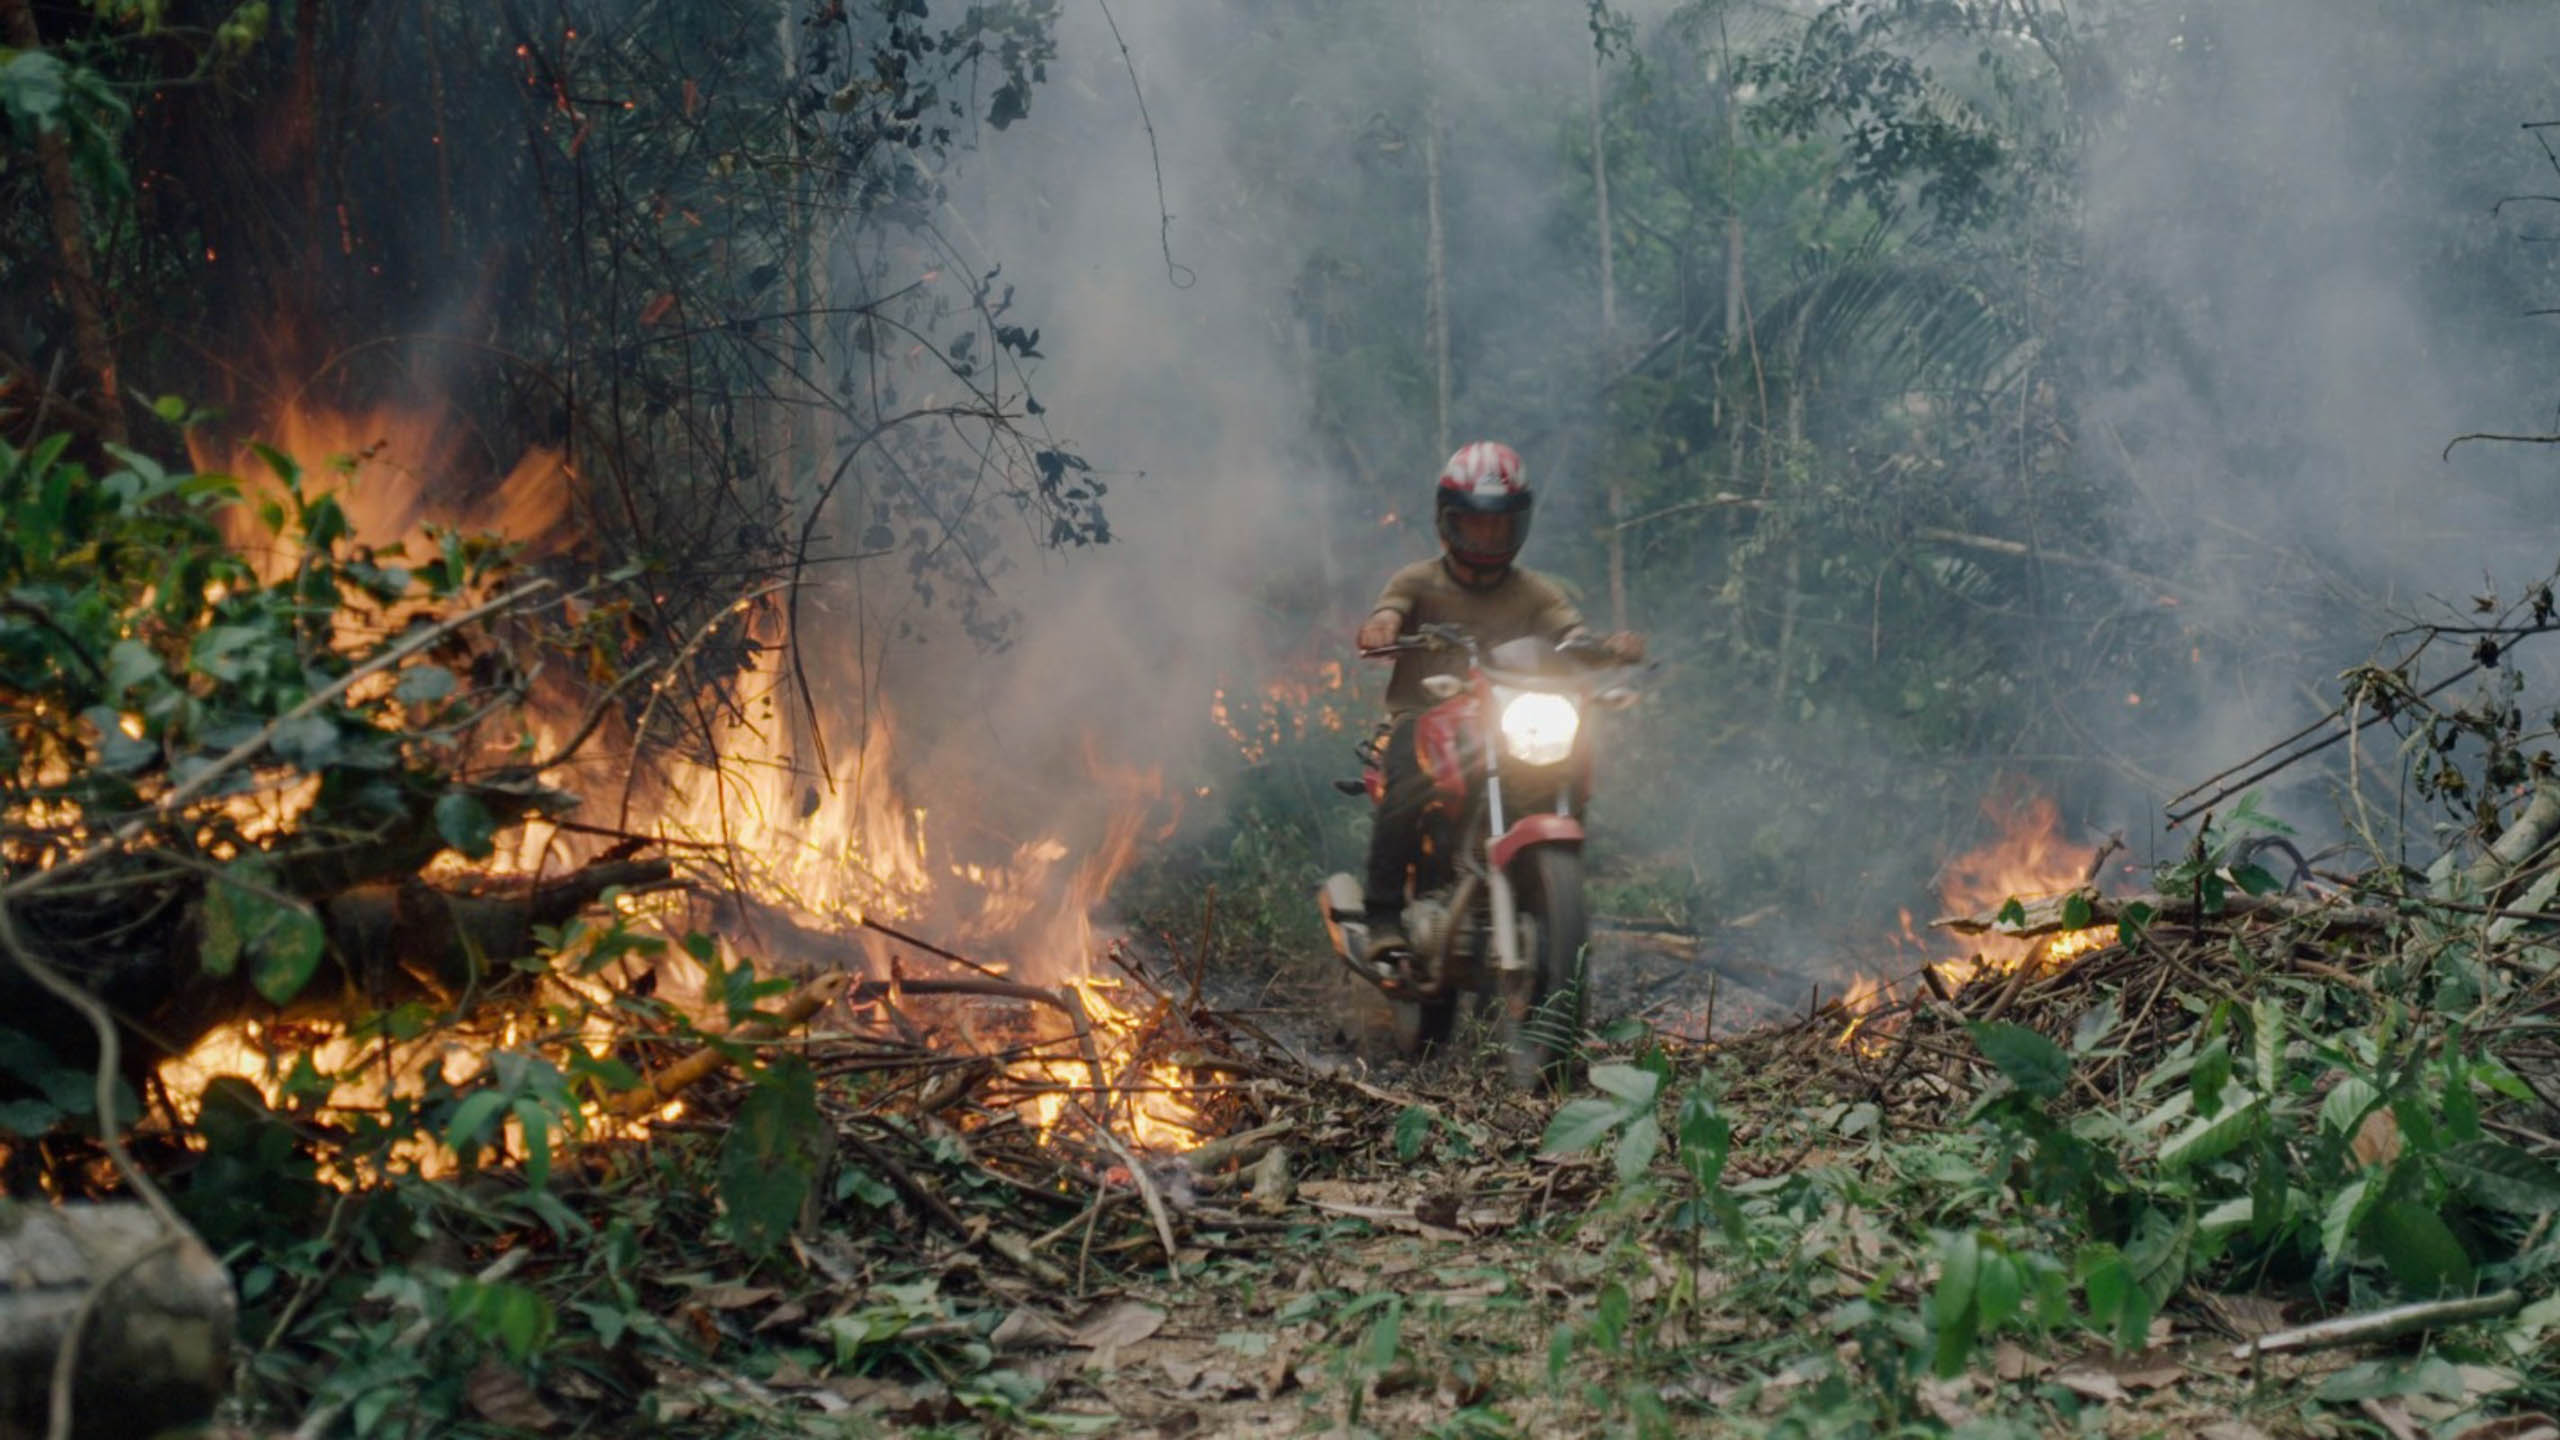 A motorcyclist drives through a forest that is hazy with smoke and fire. Photo courtesy of National Geographic.